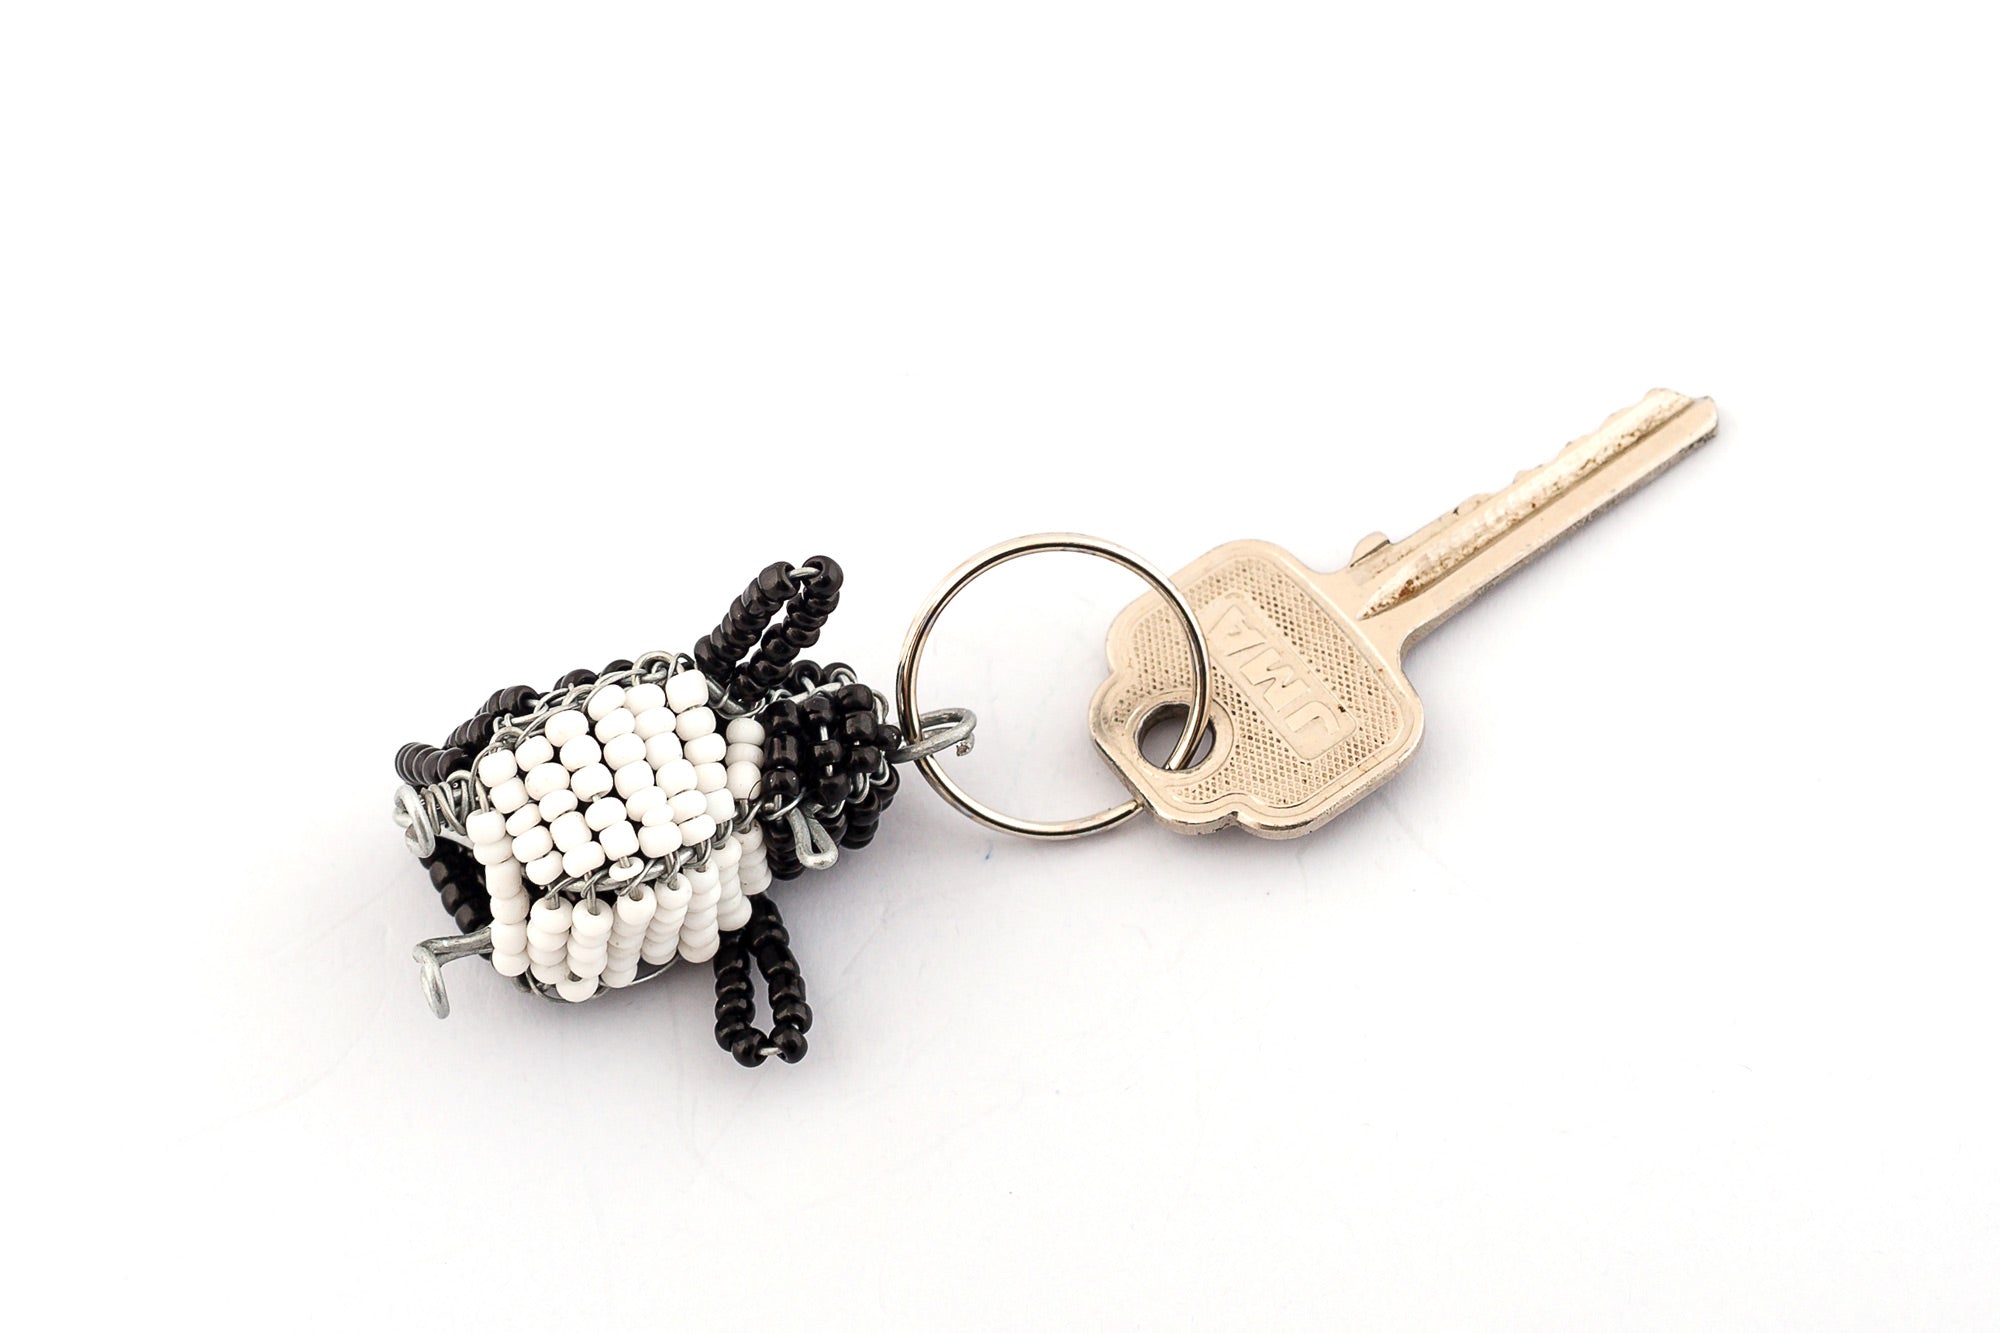 Beaded penguin key chain. Handmade with a beaded black back and white tummy - just like the tuxedo that a penguin wears!  So cute!